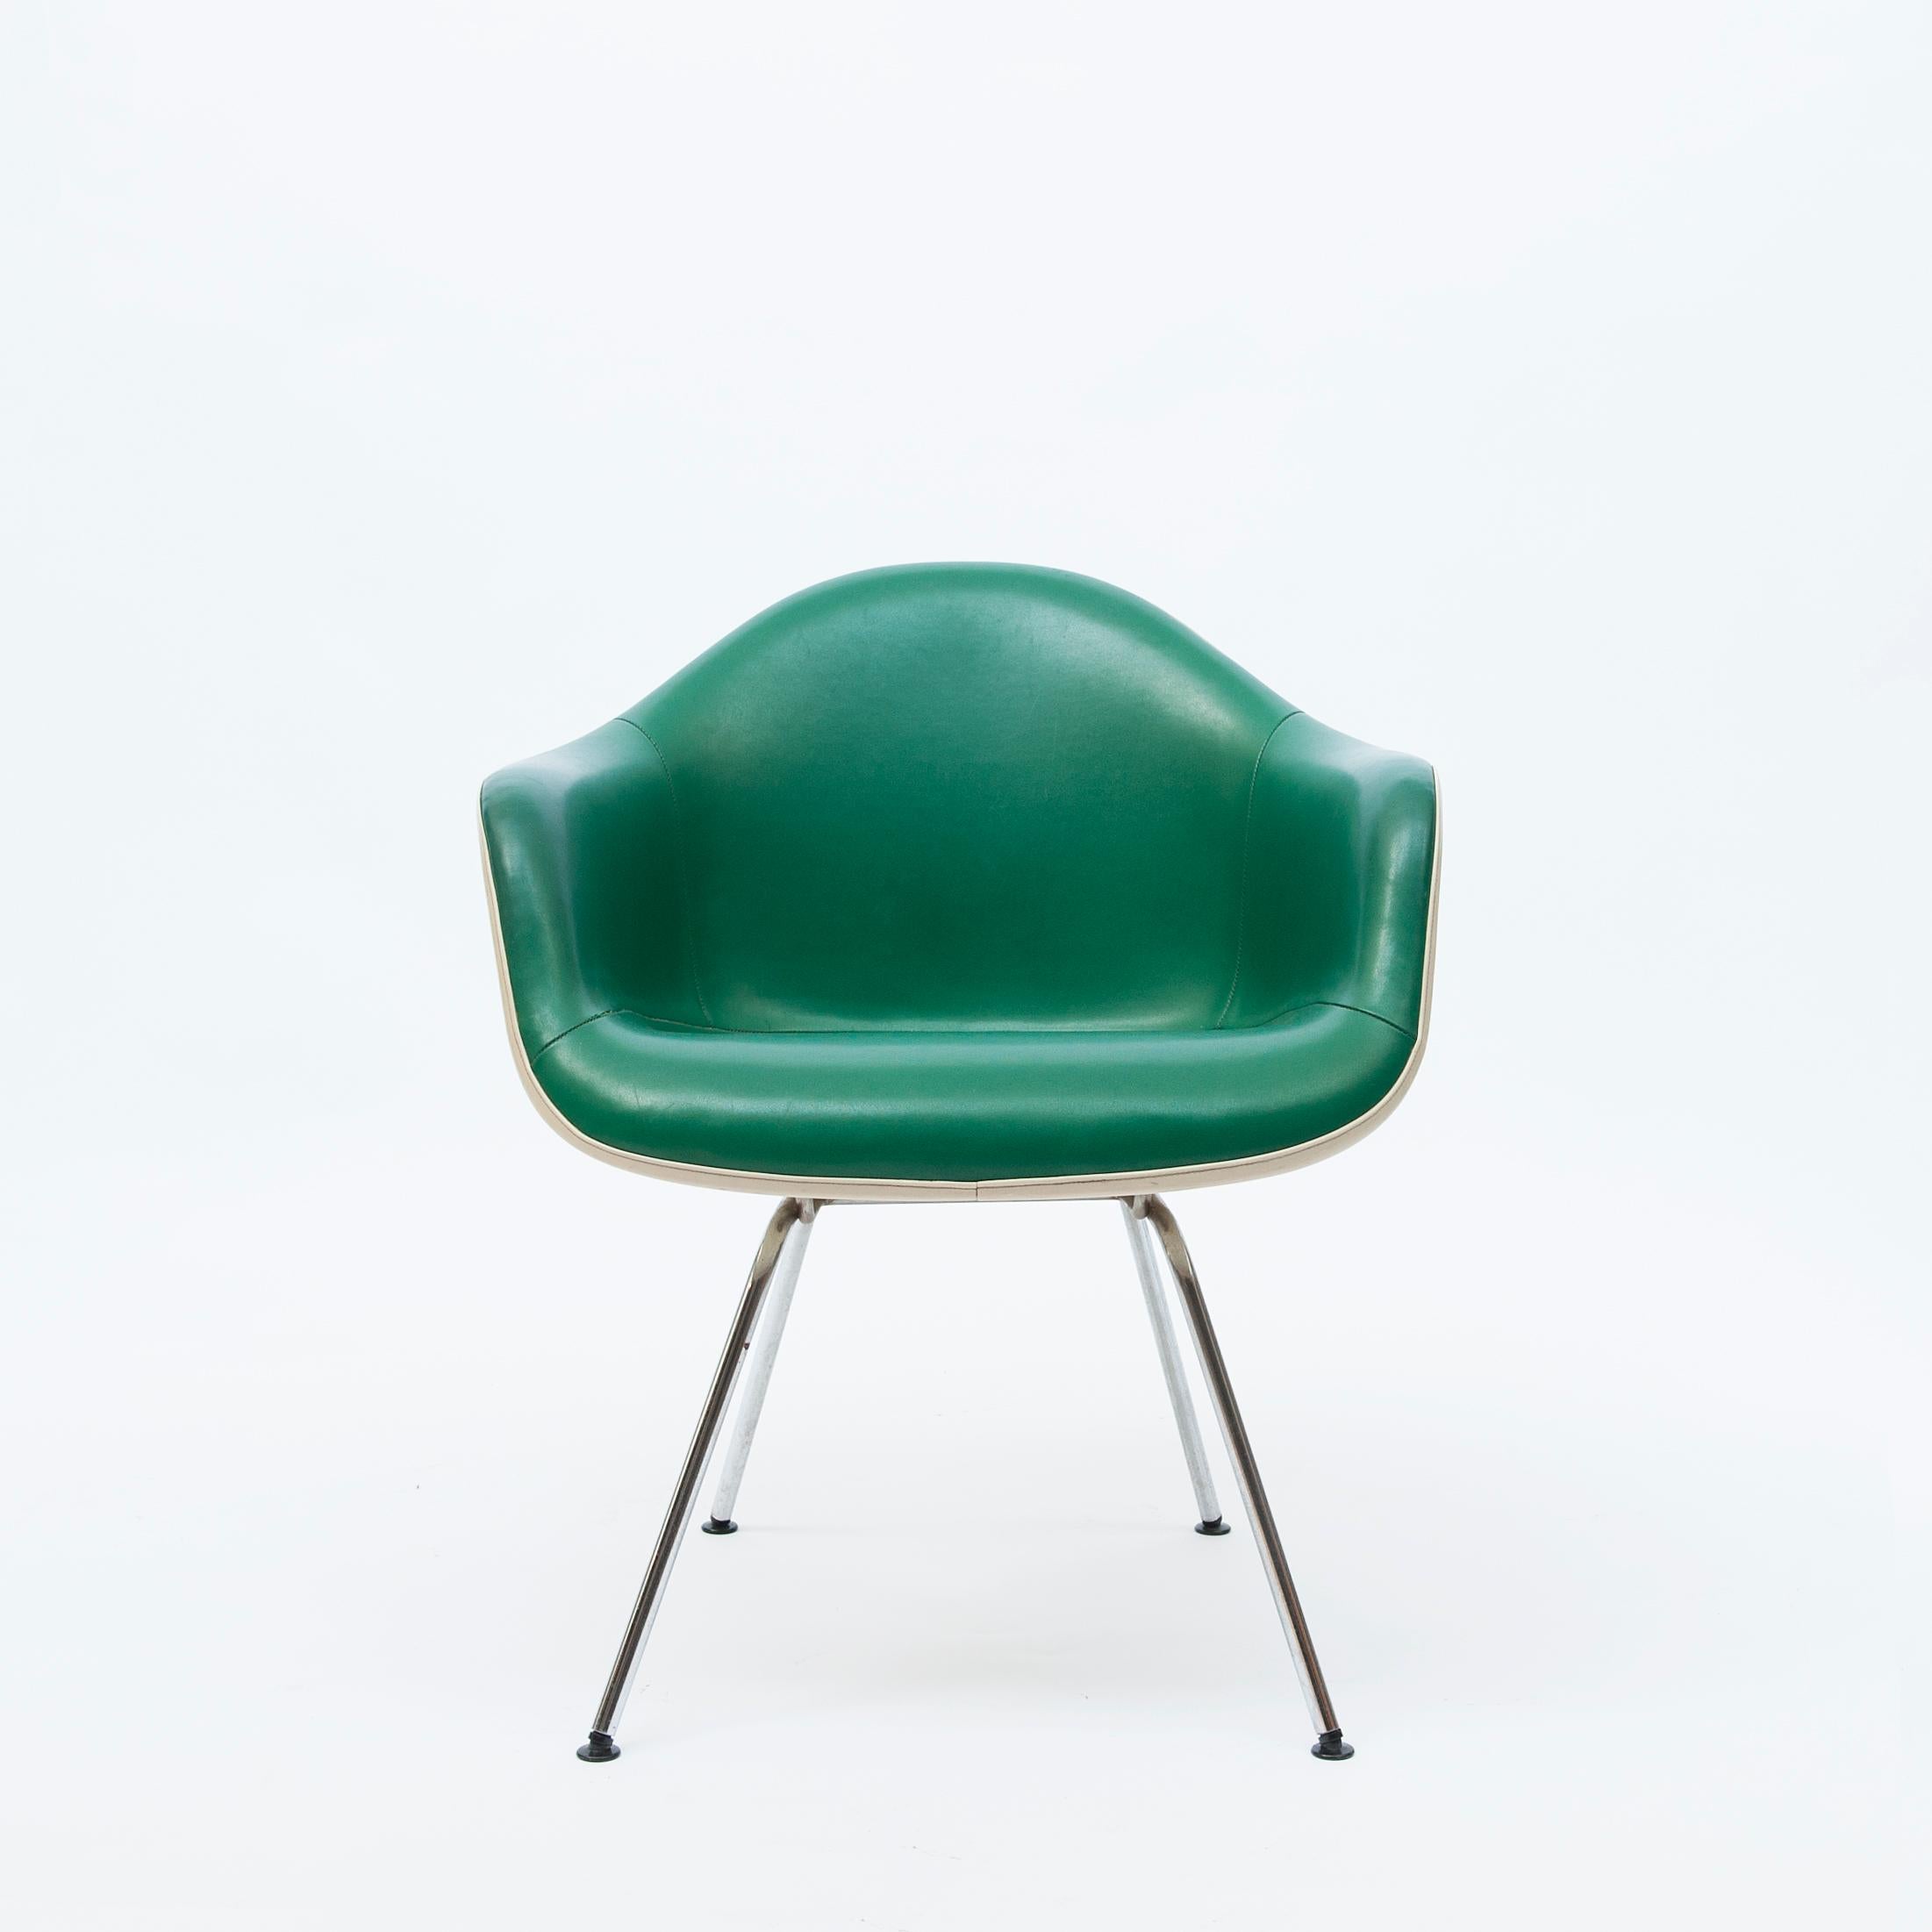 A Dax rope edge fiberglass Zenith shell chair designed by Charles & Ray Eames for Herman Miller Co. with aluminum-finished legs retaining the original green leather upholstery over a fiberglass shell. 
Made by Herman Miller in the USA, circa 1960s.